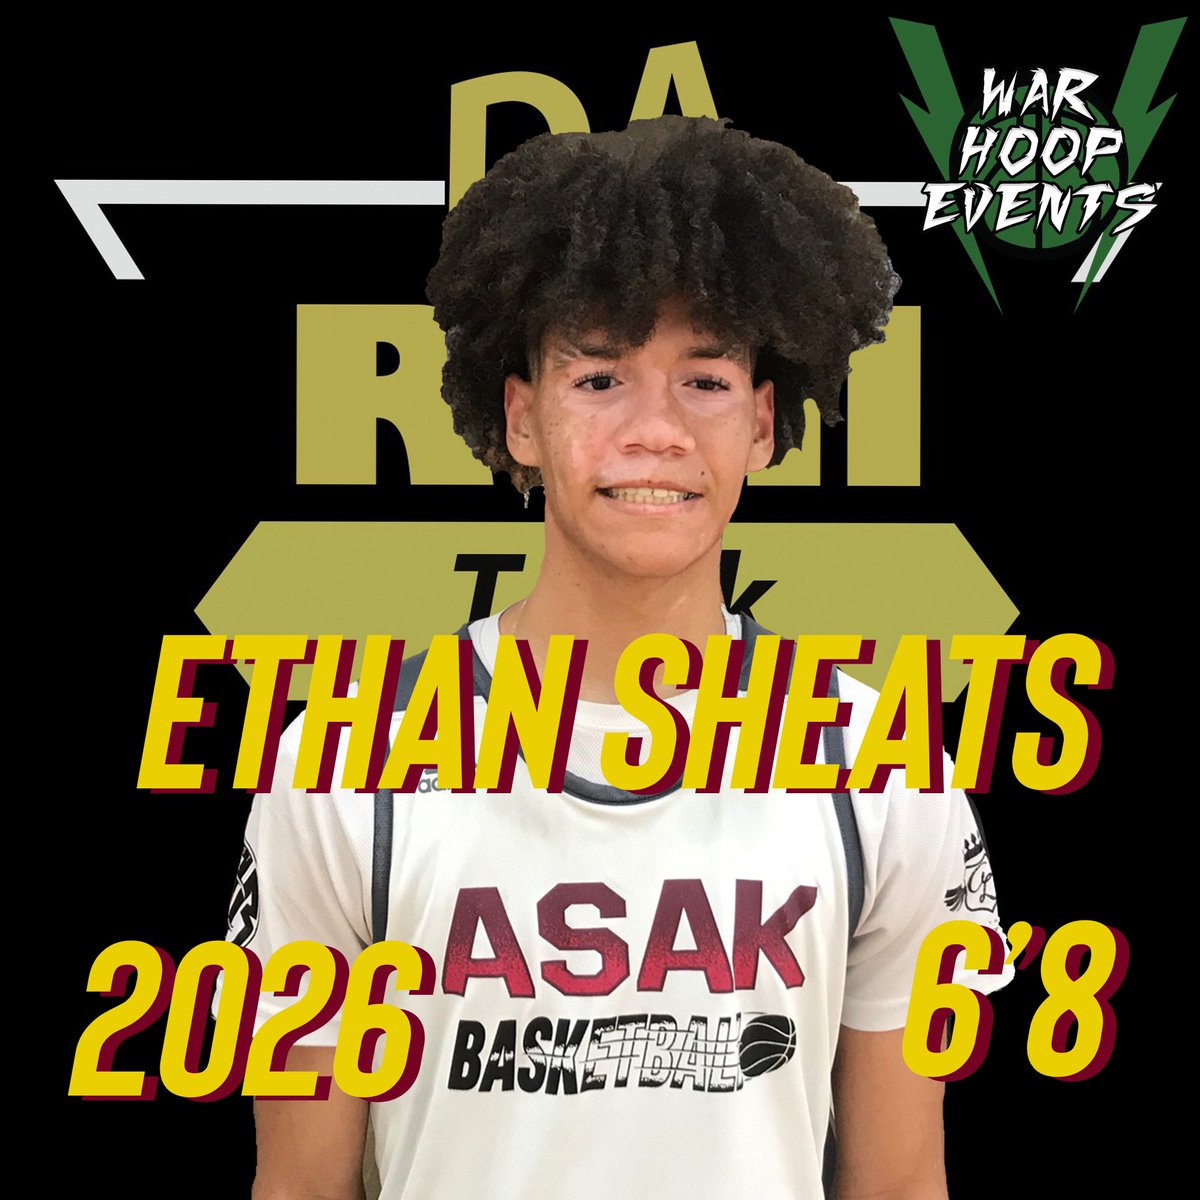 @Warb4storm 2024 recap: @ASAKELITE F @esheats21 of @denton_bb is another BIG that yall better put your eyes on; SHEATS runs the floor, fills lanes & delivers above the rim buckets; can shoot it behind the arc too; strong rebounder n passer #DaREALtalkNation